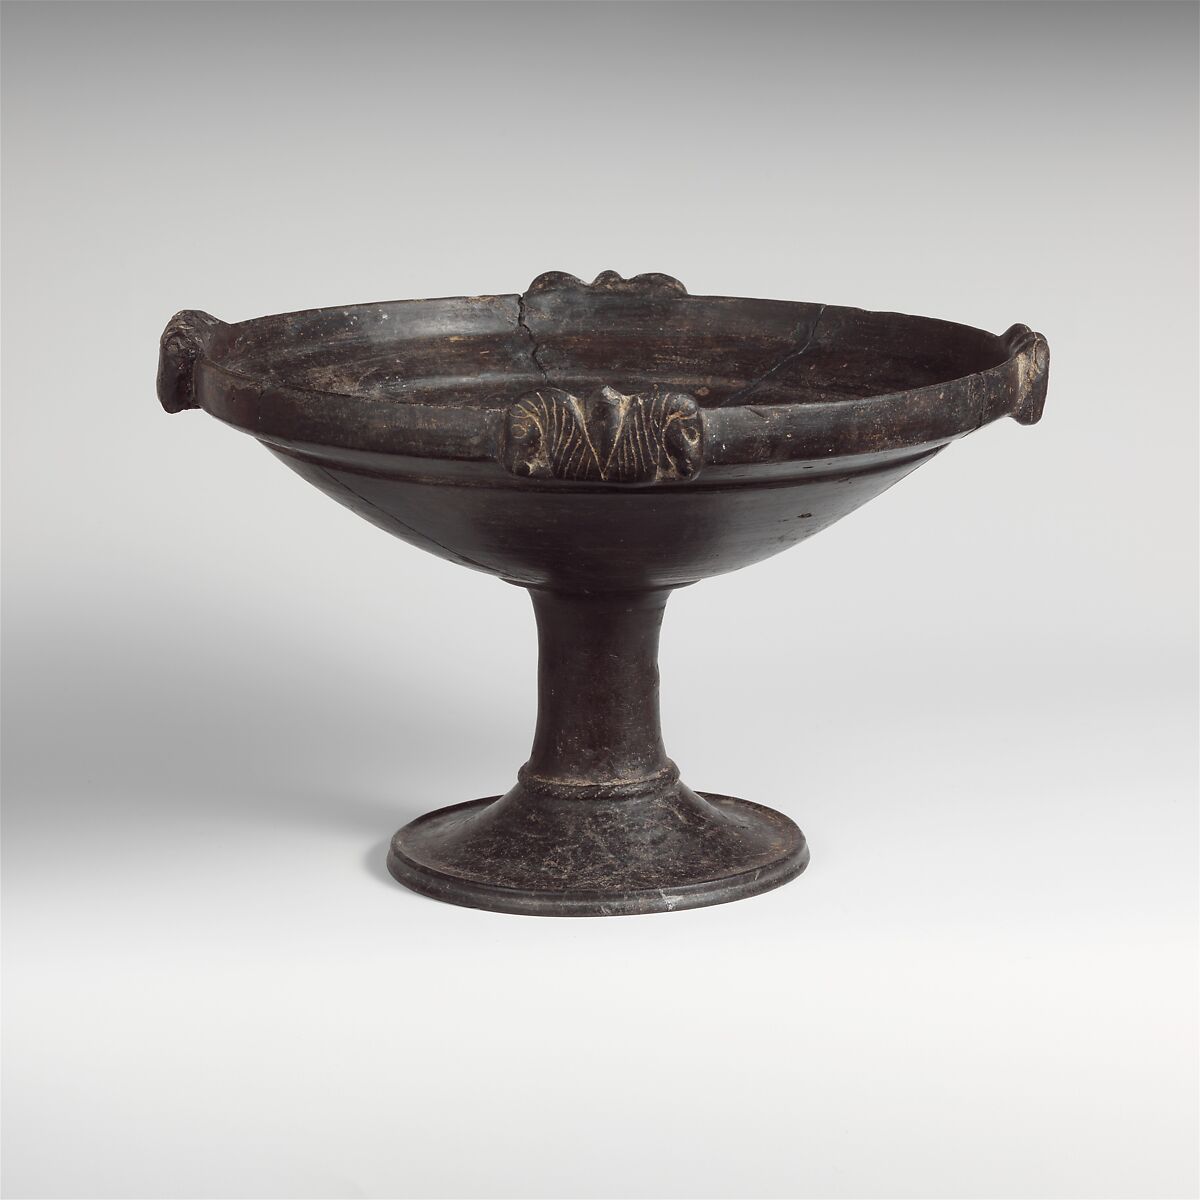 Terracotta footed bowl, Terracotta, Etruscan 